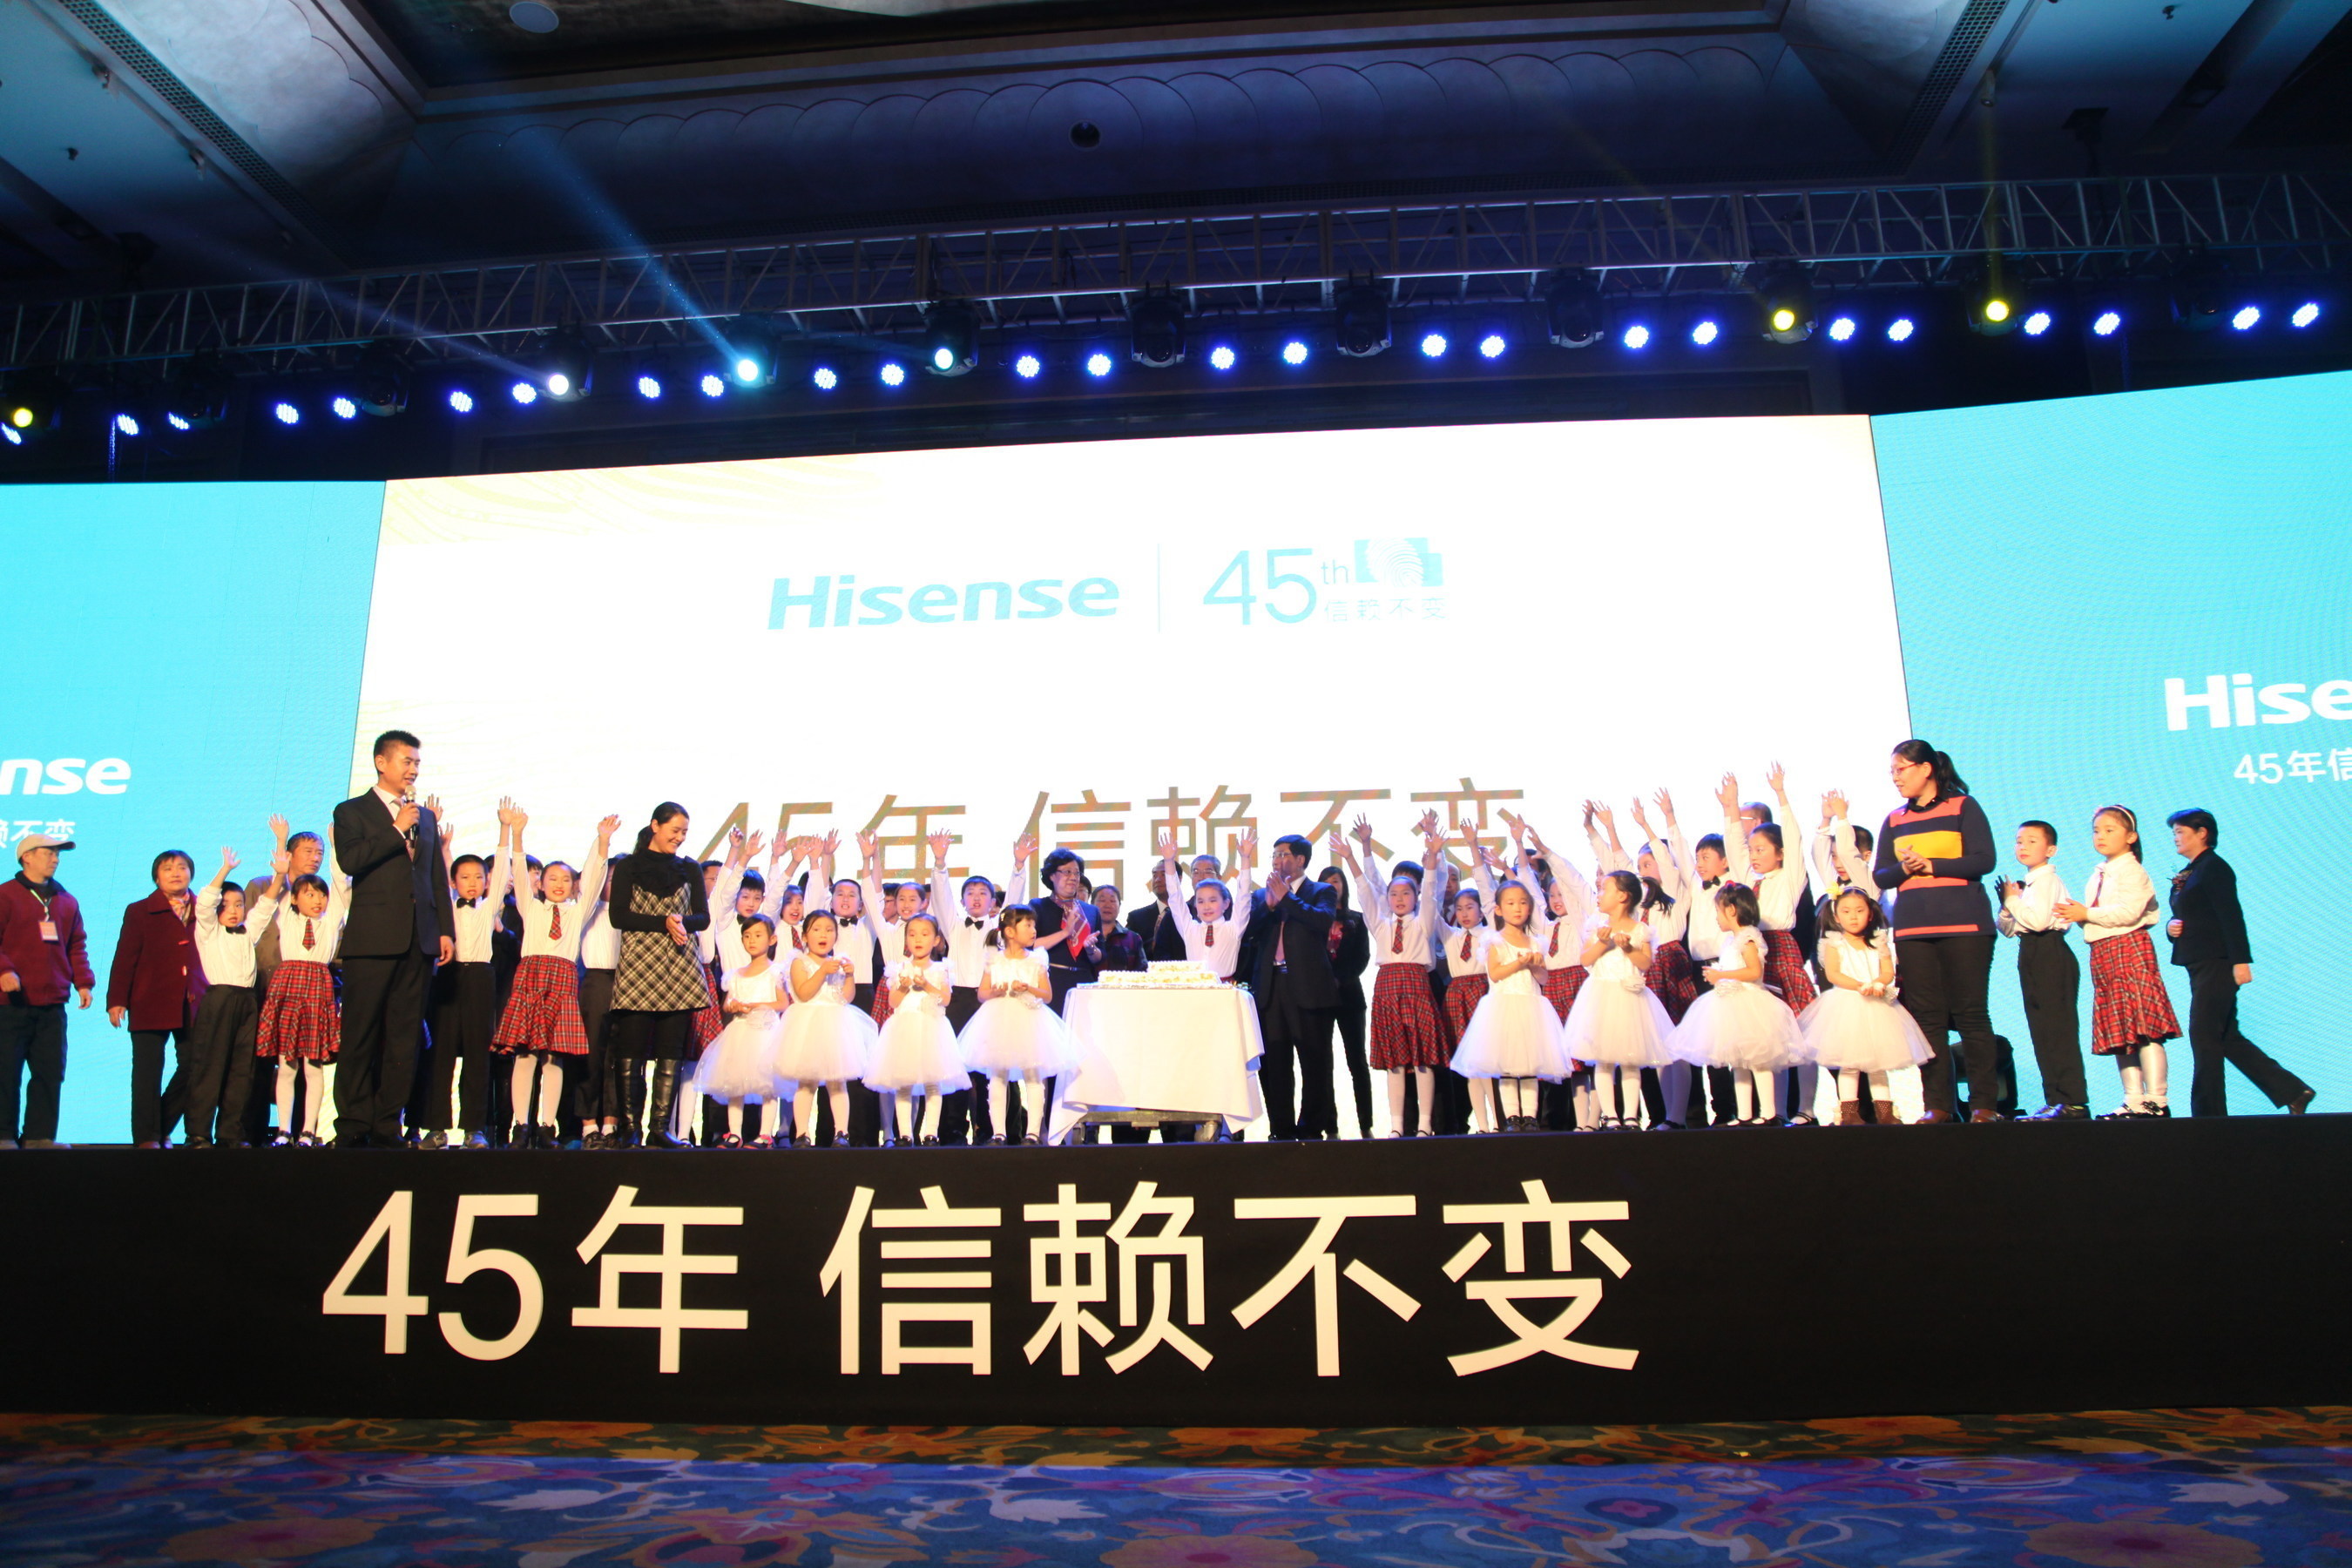 Hisense has provided consistently reliable products and services for 45 years